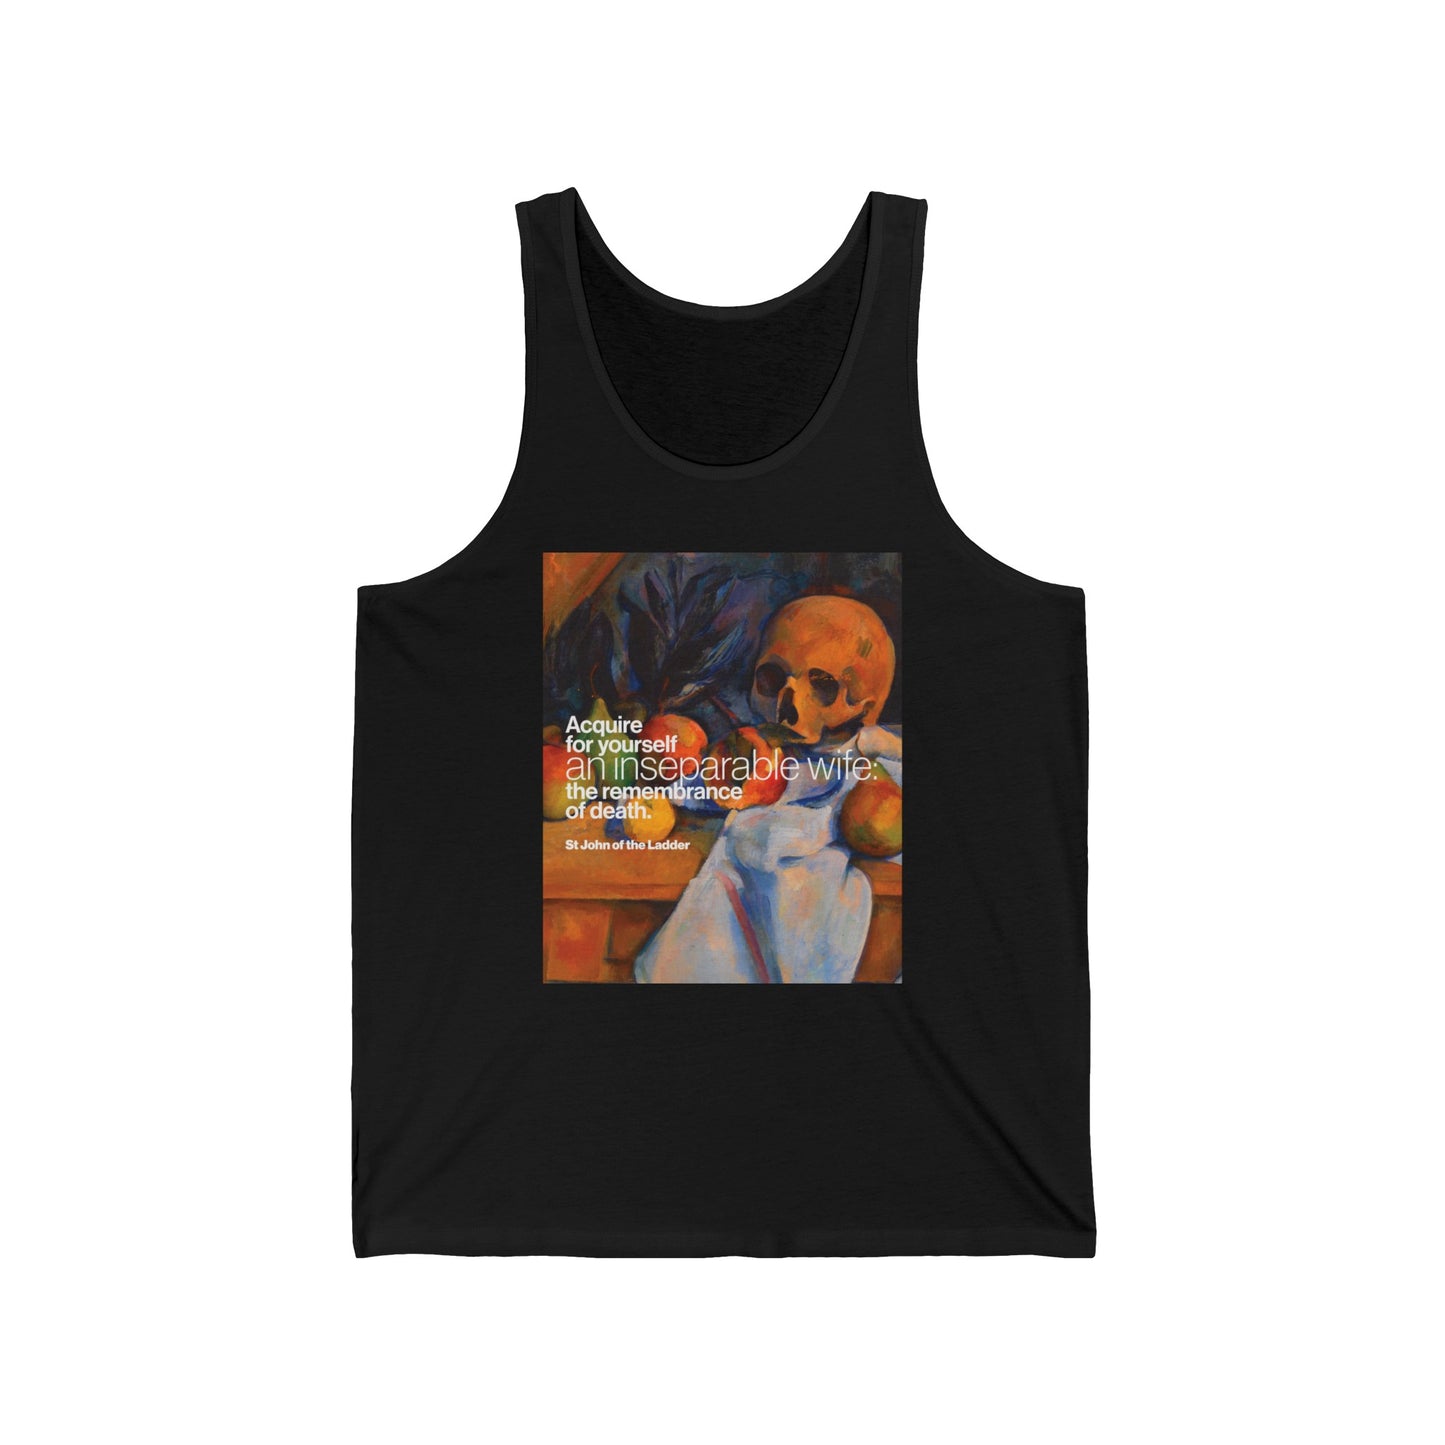 Acquire an Inseparable Wife (St John Climacus) No. 1 | Orthodox Christian Jersey Tank Top / Sleeveless Shirt